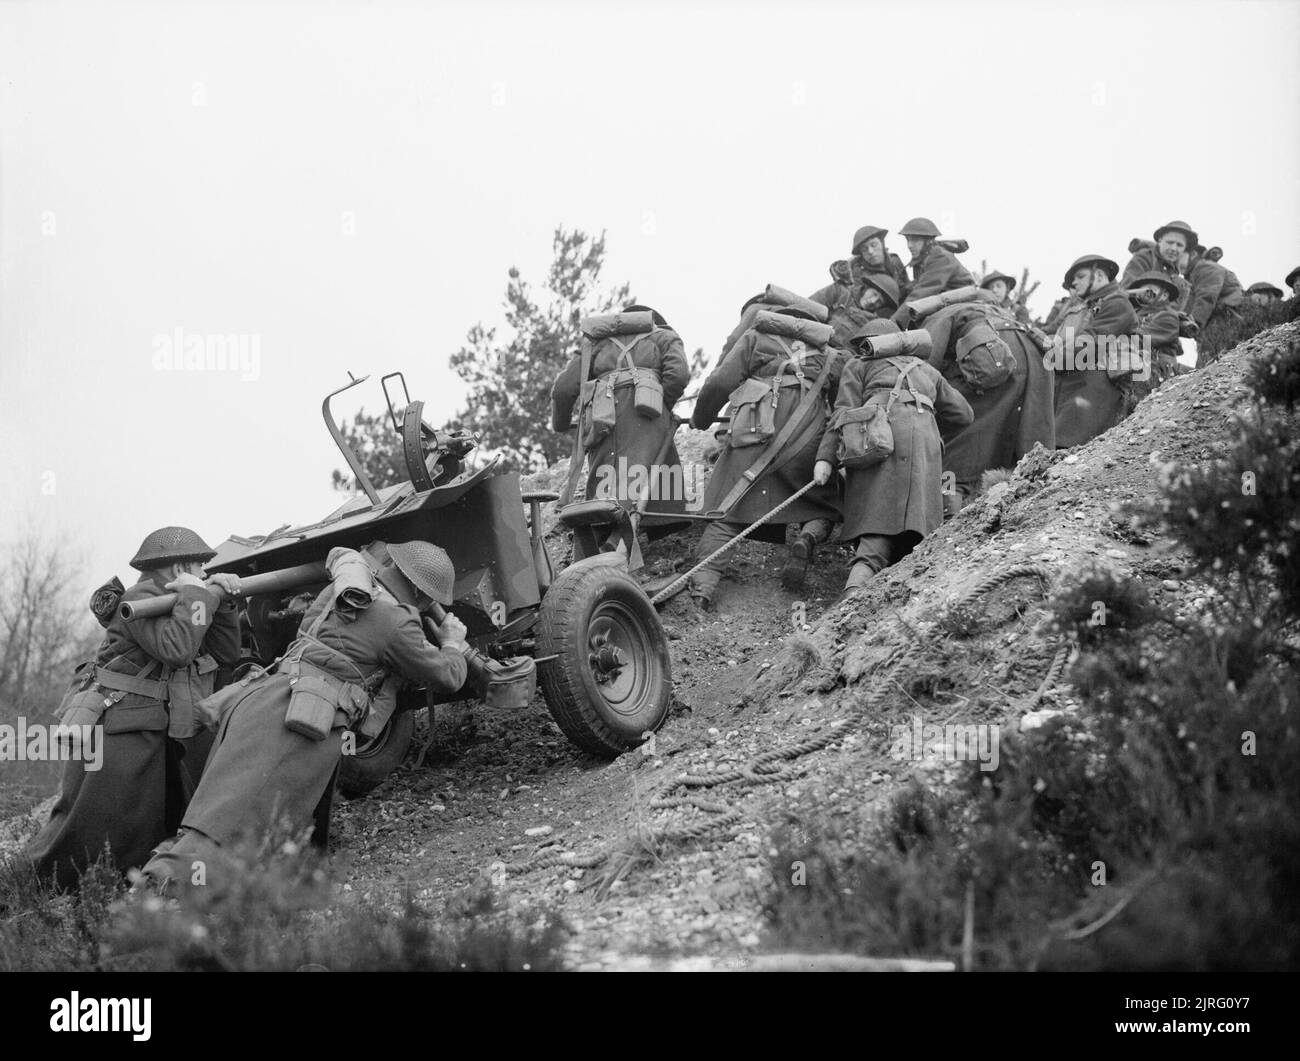 The British Army in the United Kingdom 1939-45 Gunners of 20th Anti-Tank Regiment, 3rd Infantry Division, haul a 2-pdr anti-tank gun up a steep slope during training at Verwood in Dorset, 22 March 1941. Stock Photo